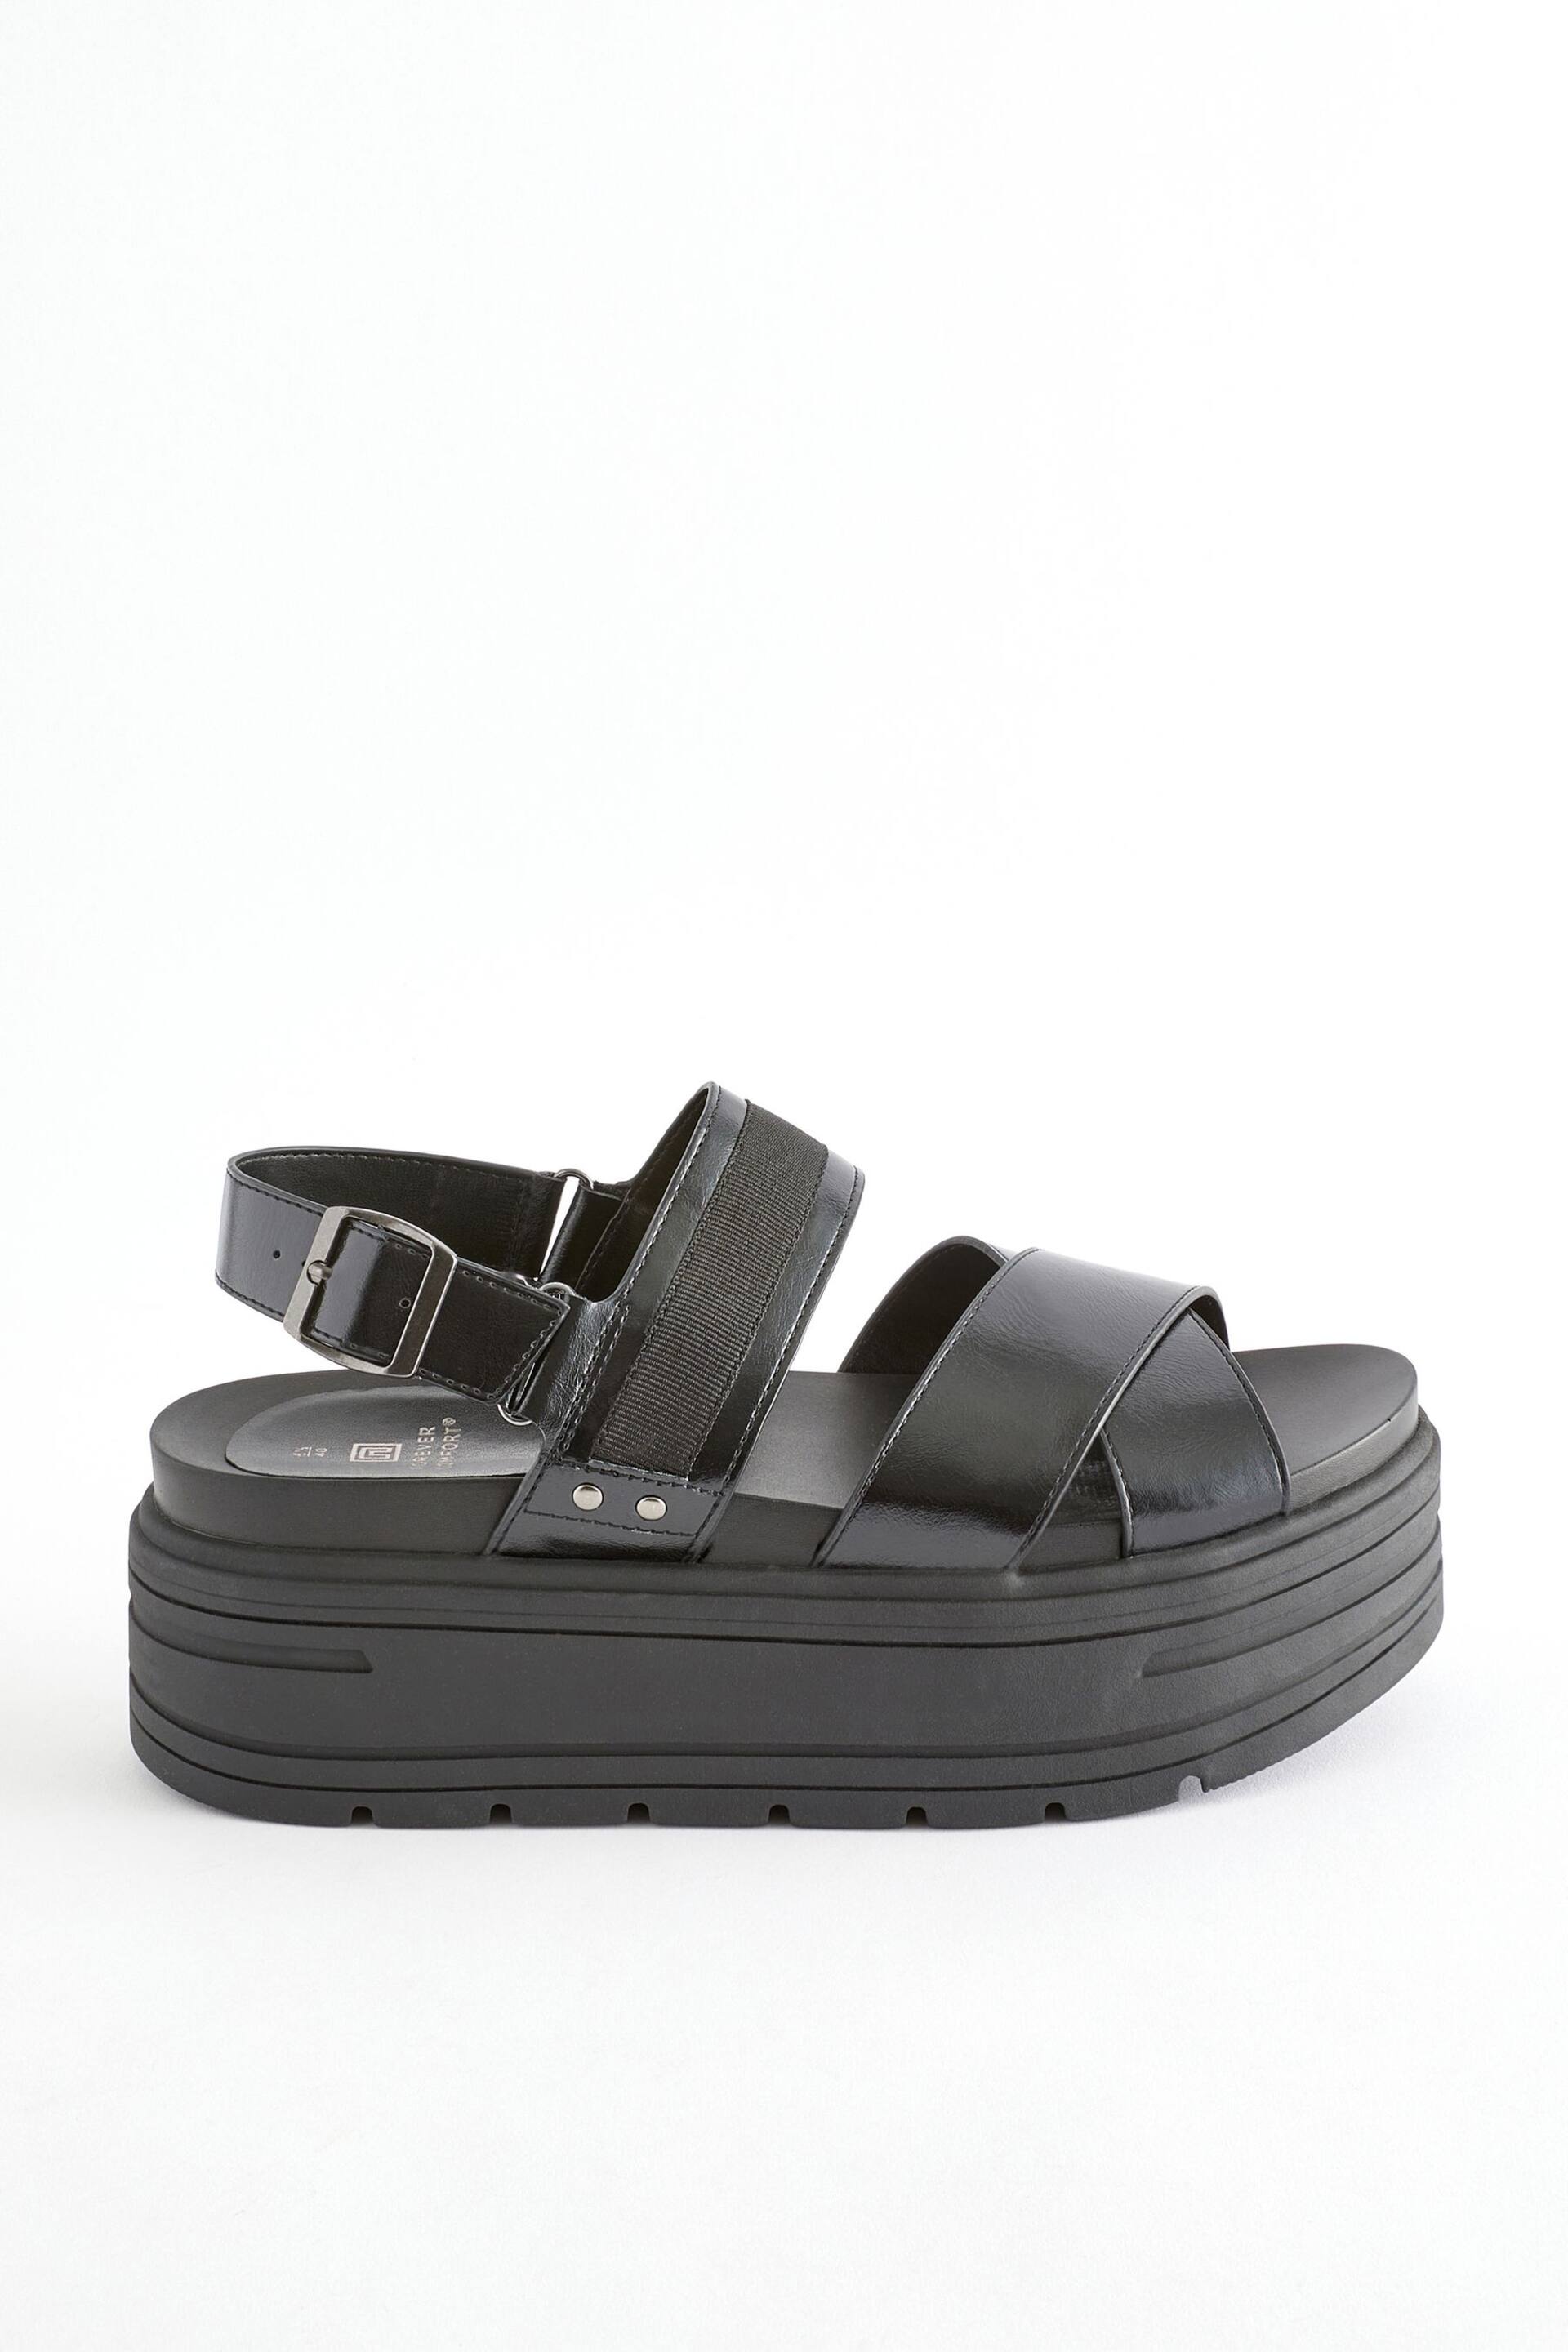 Black Regular/Wide Fit Chunky Wedge Sandals - Image 2 of 6